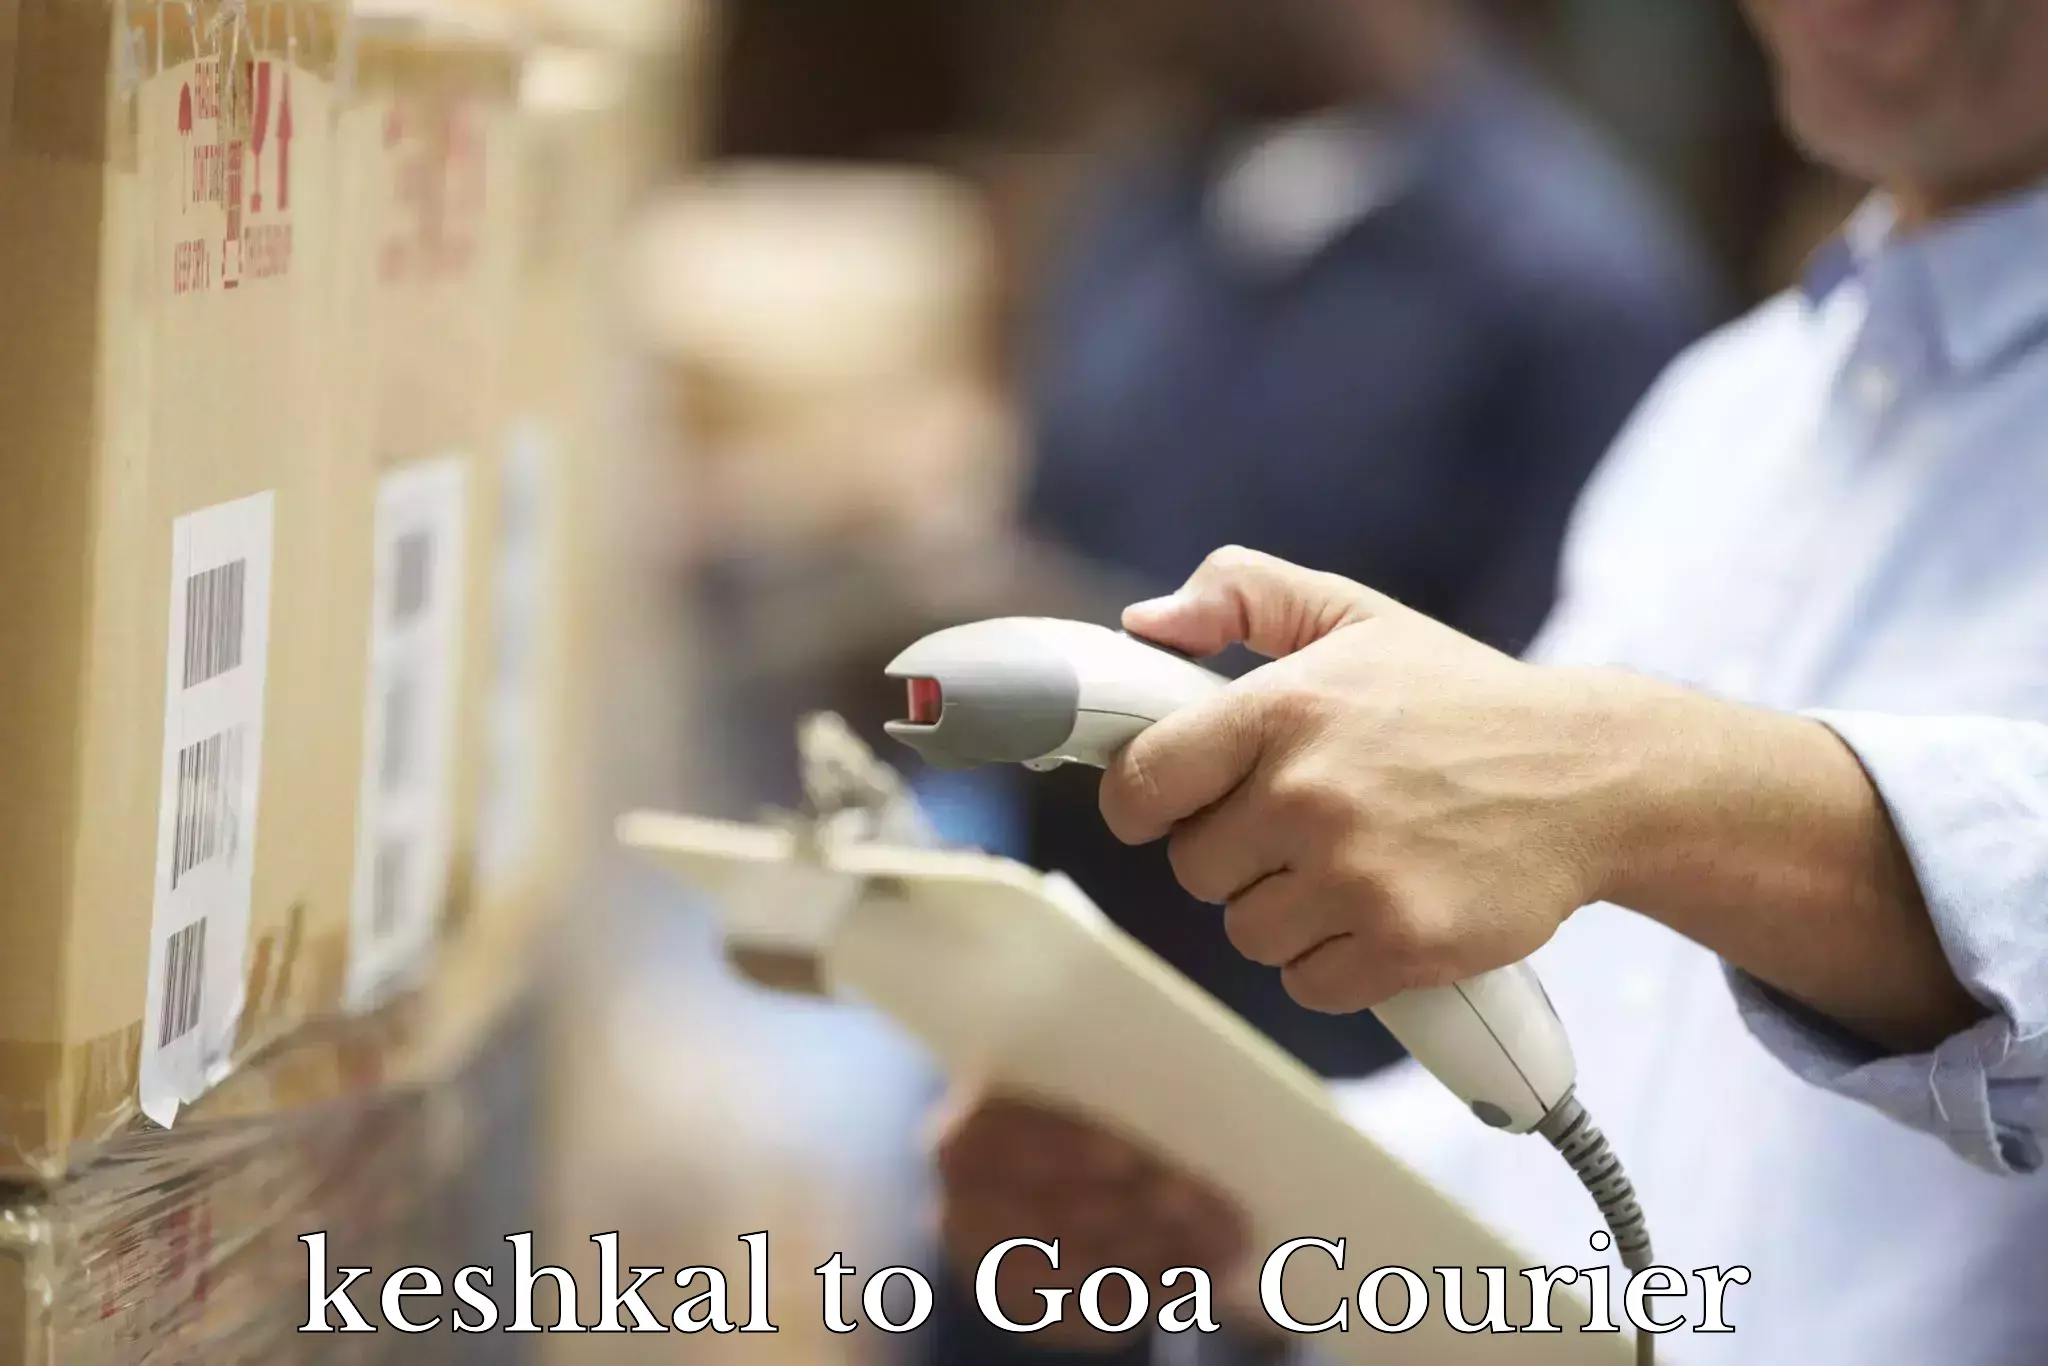 Rural area delivery keshkal to Goa